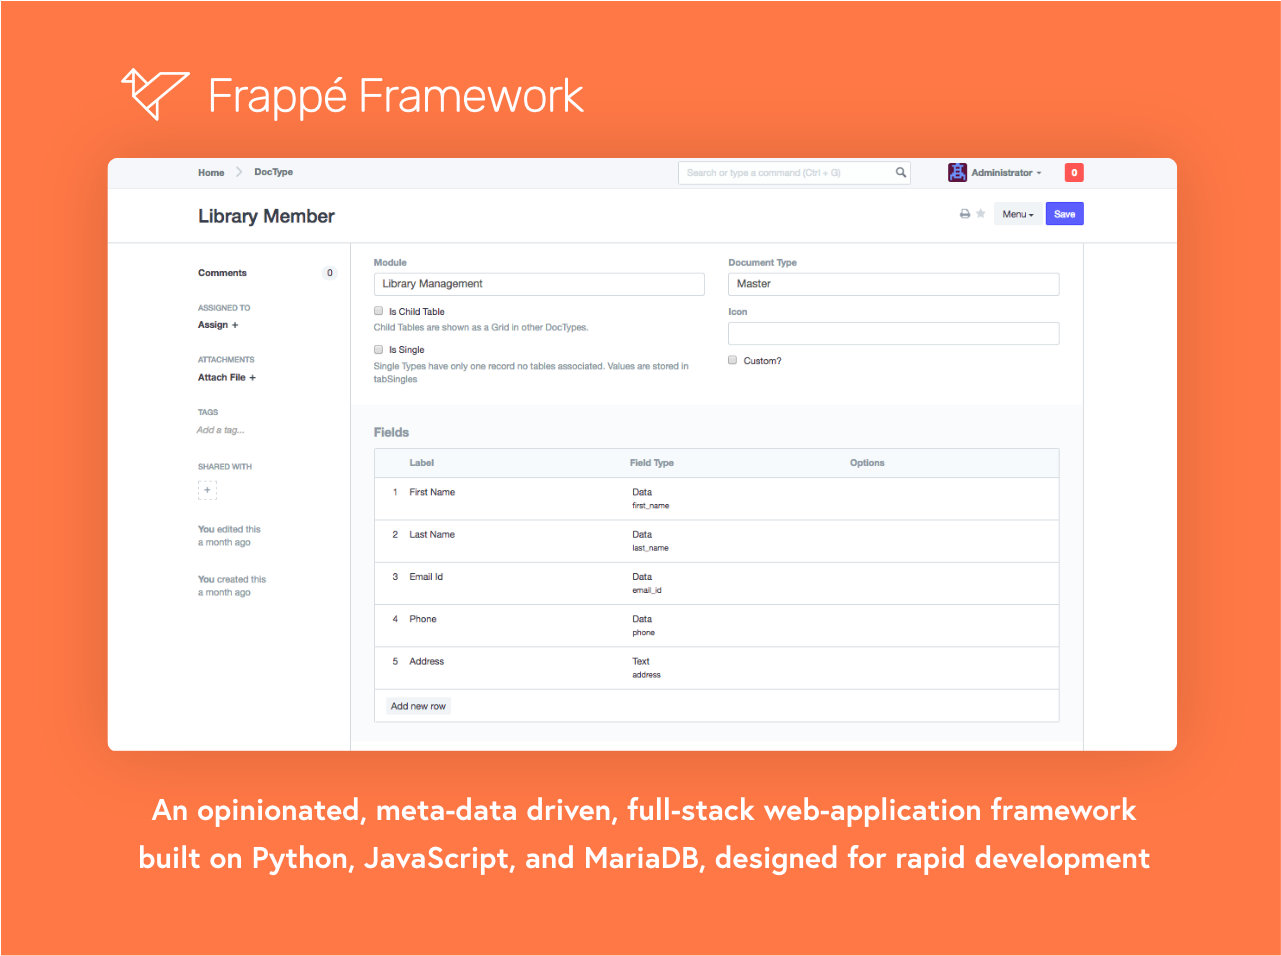 Frappé: an opinionated, meta-data driven, full-stack web-application framework built on Python, JavaScript, and MariaDB, designed for rapid development